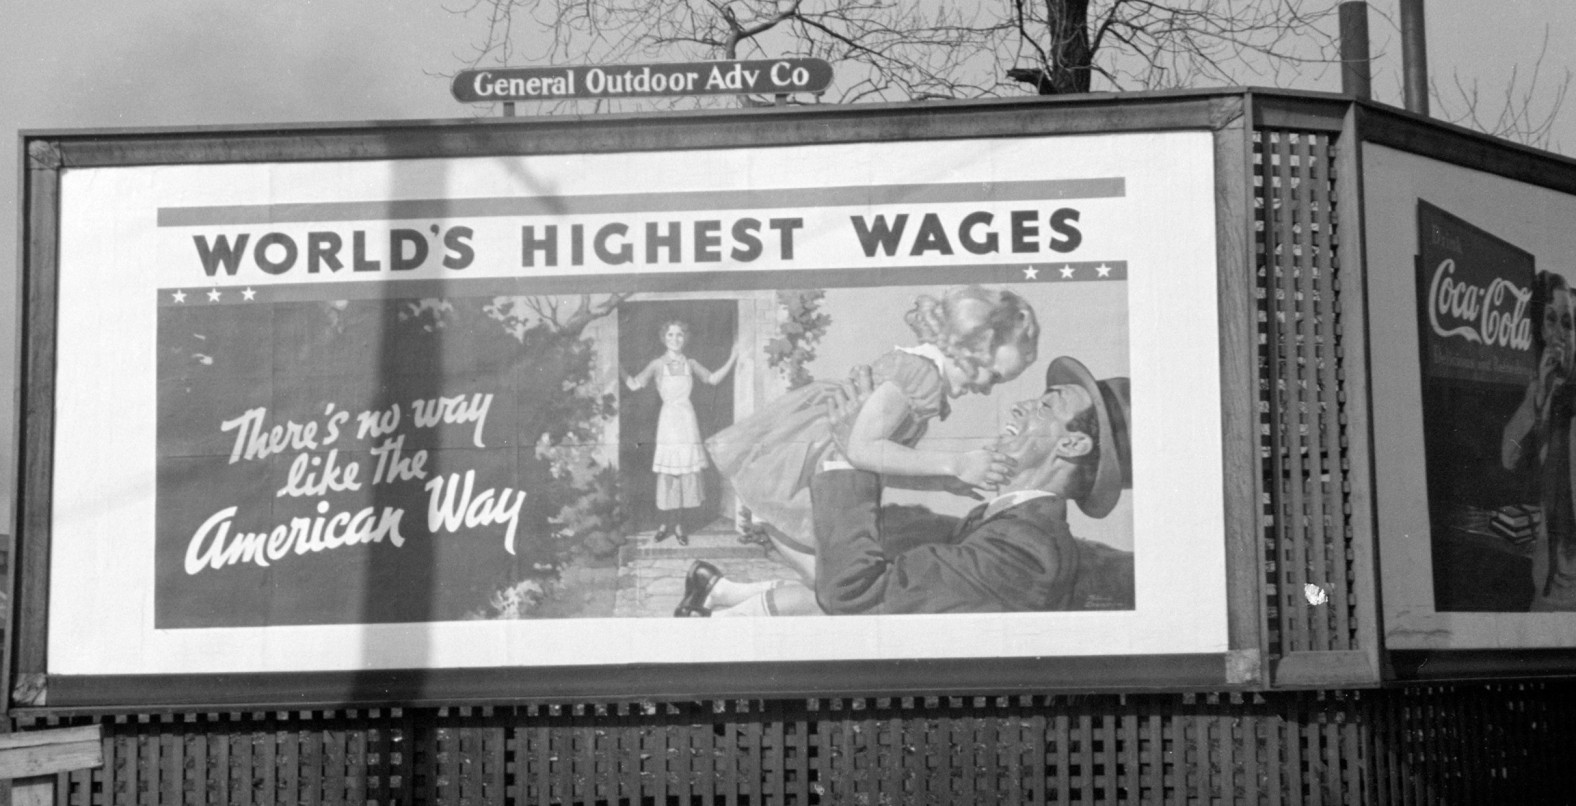 Billboard advertising America as having World's Highest Wages